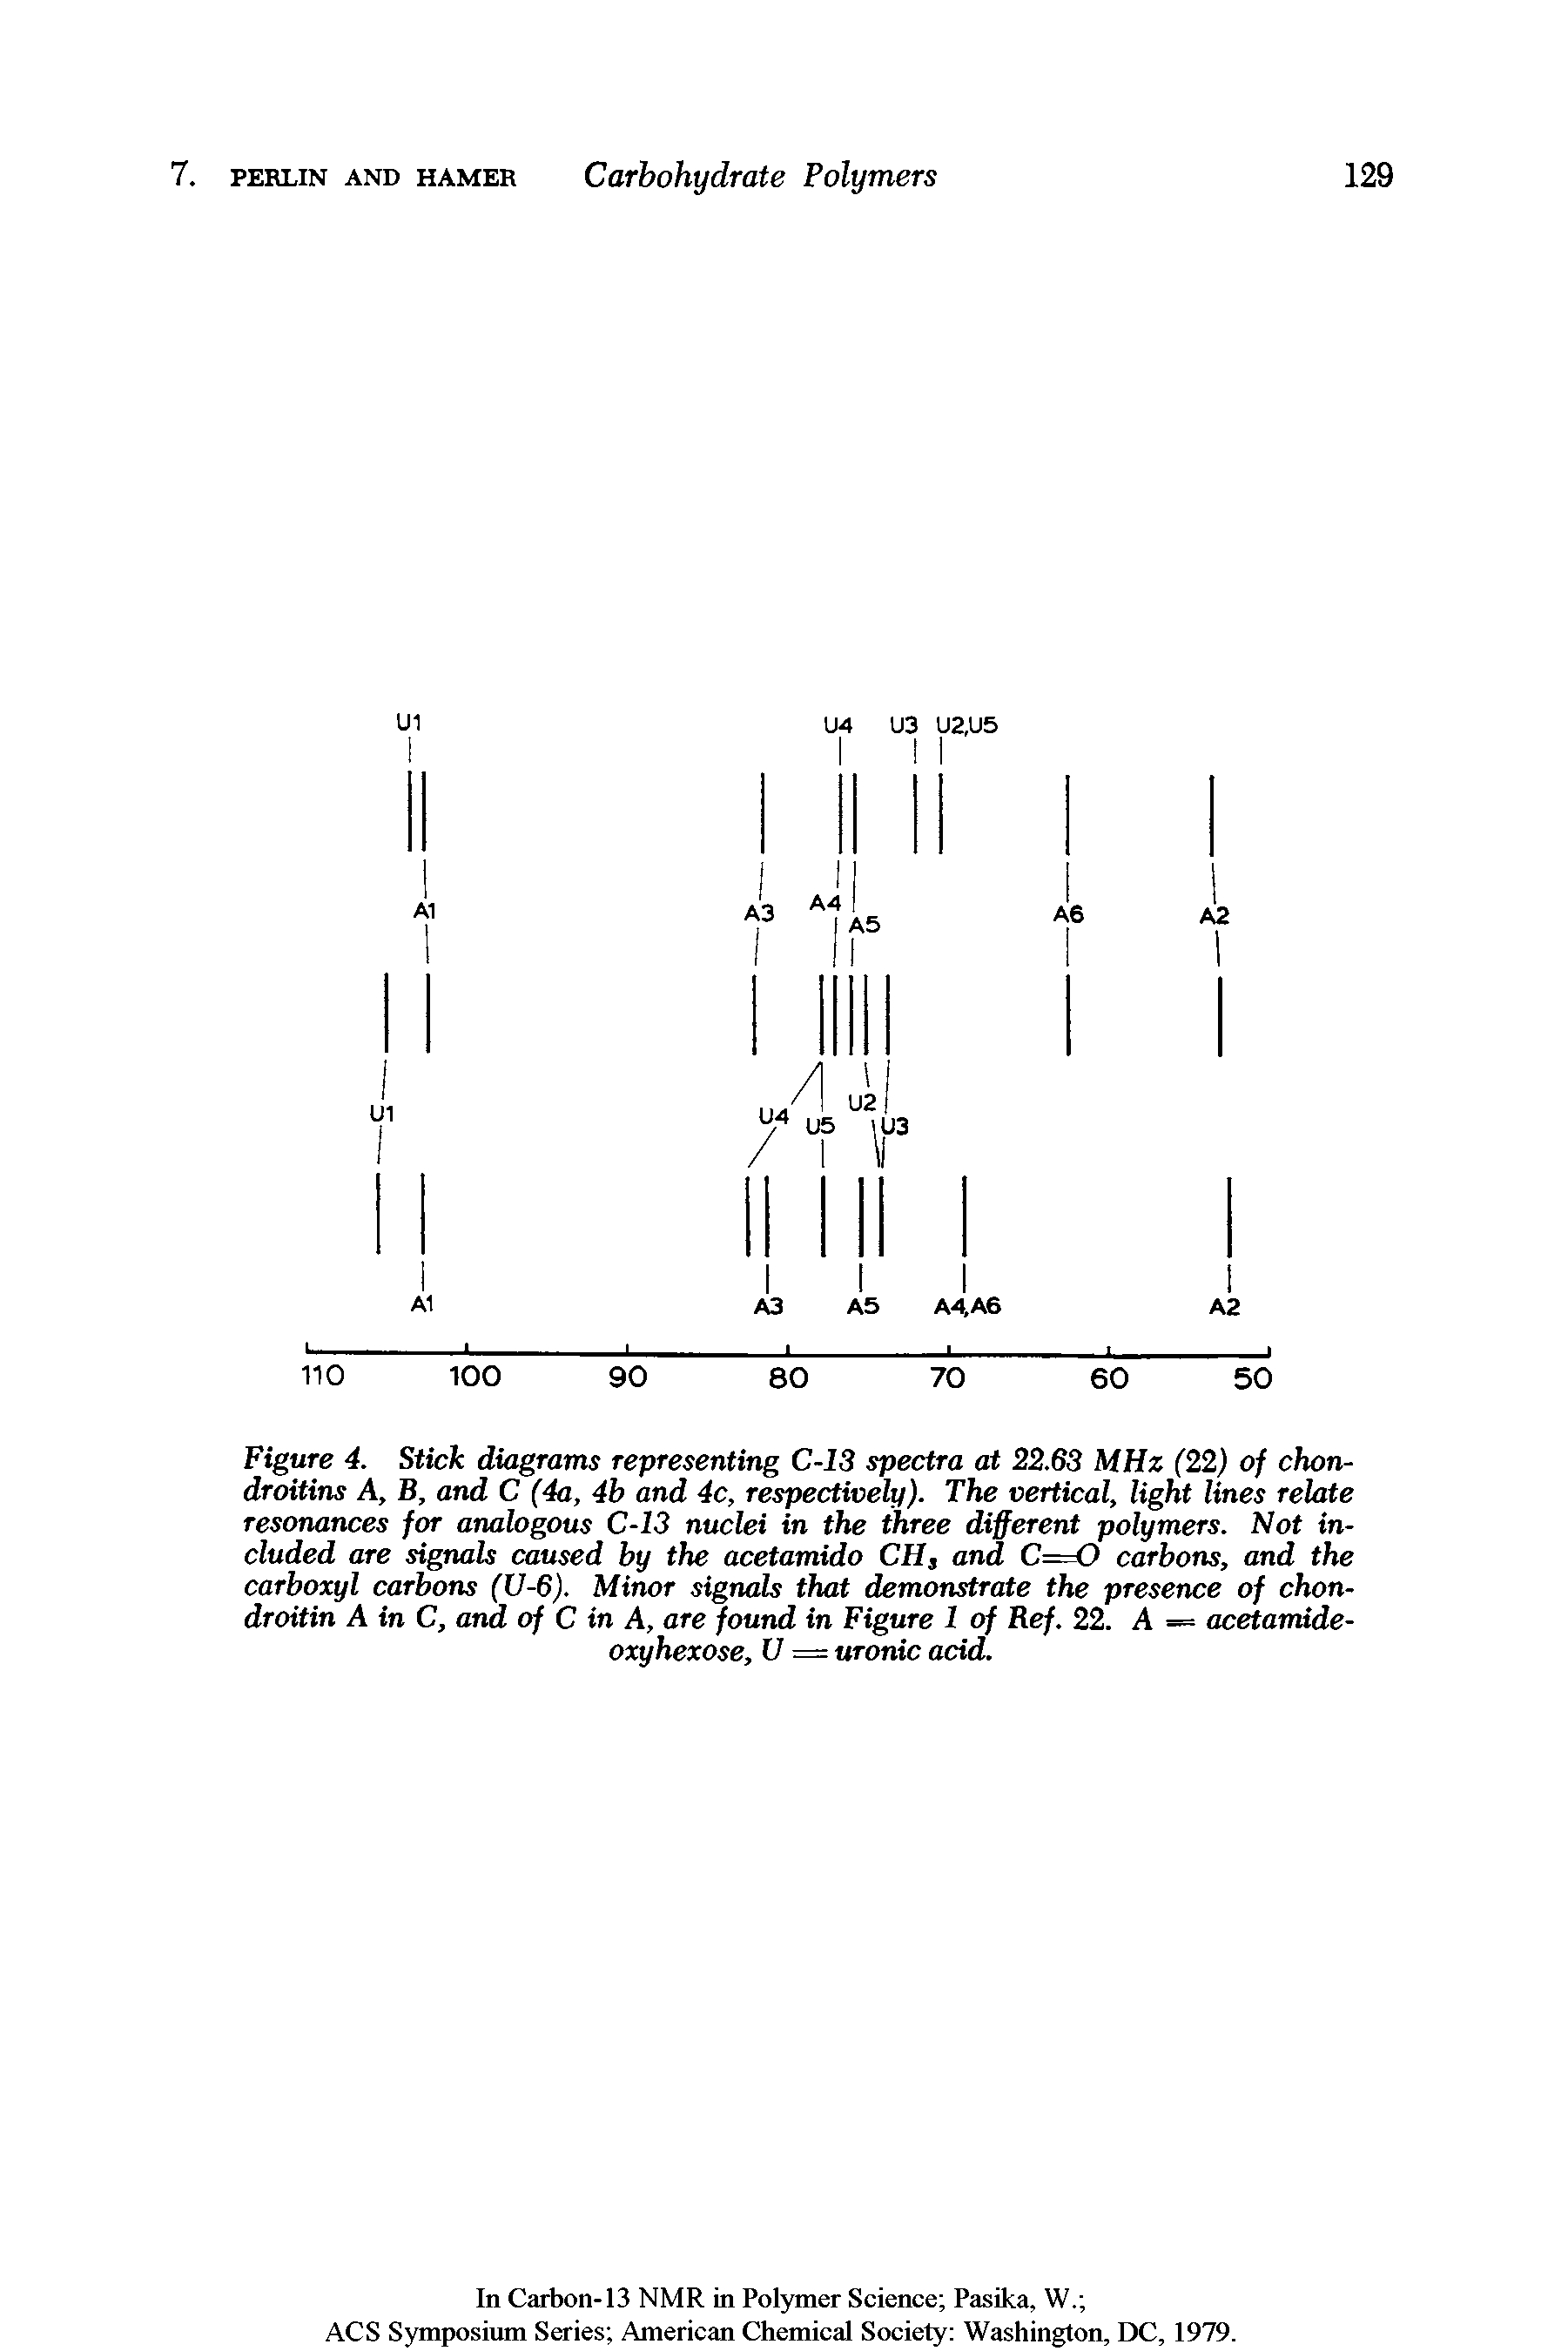 Figure 4. Stick diagrams representing C-13 spectra at 22.63 MHz (22) of chon-droitins A, B, and C (4a, 4b and 4c, respectively). The vertical, light lines relate resonances for analogous C-13 nuclei in the three different polymers. Not included are sigrwls caused by the acetamido CH, and C==0 carbons, and the carboxyl carbons (U-6). Minor signals that demonstrate the presence of chon-droitin A in C, and of C in A, are found in Figure 1 of Ref. 22. A = acetamide-oxyhexose, U = uronic acid.